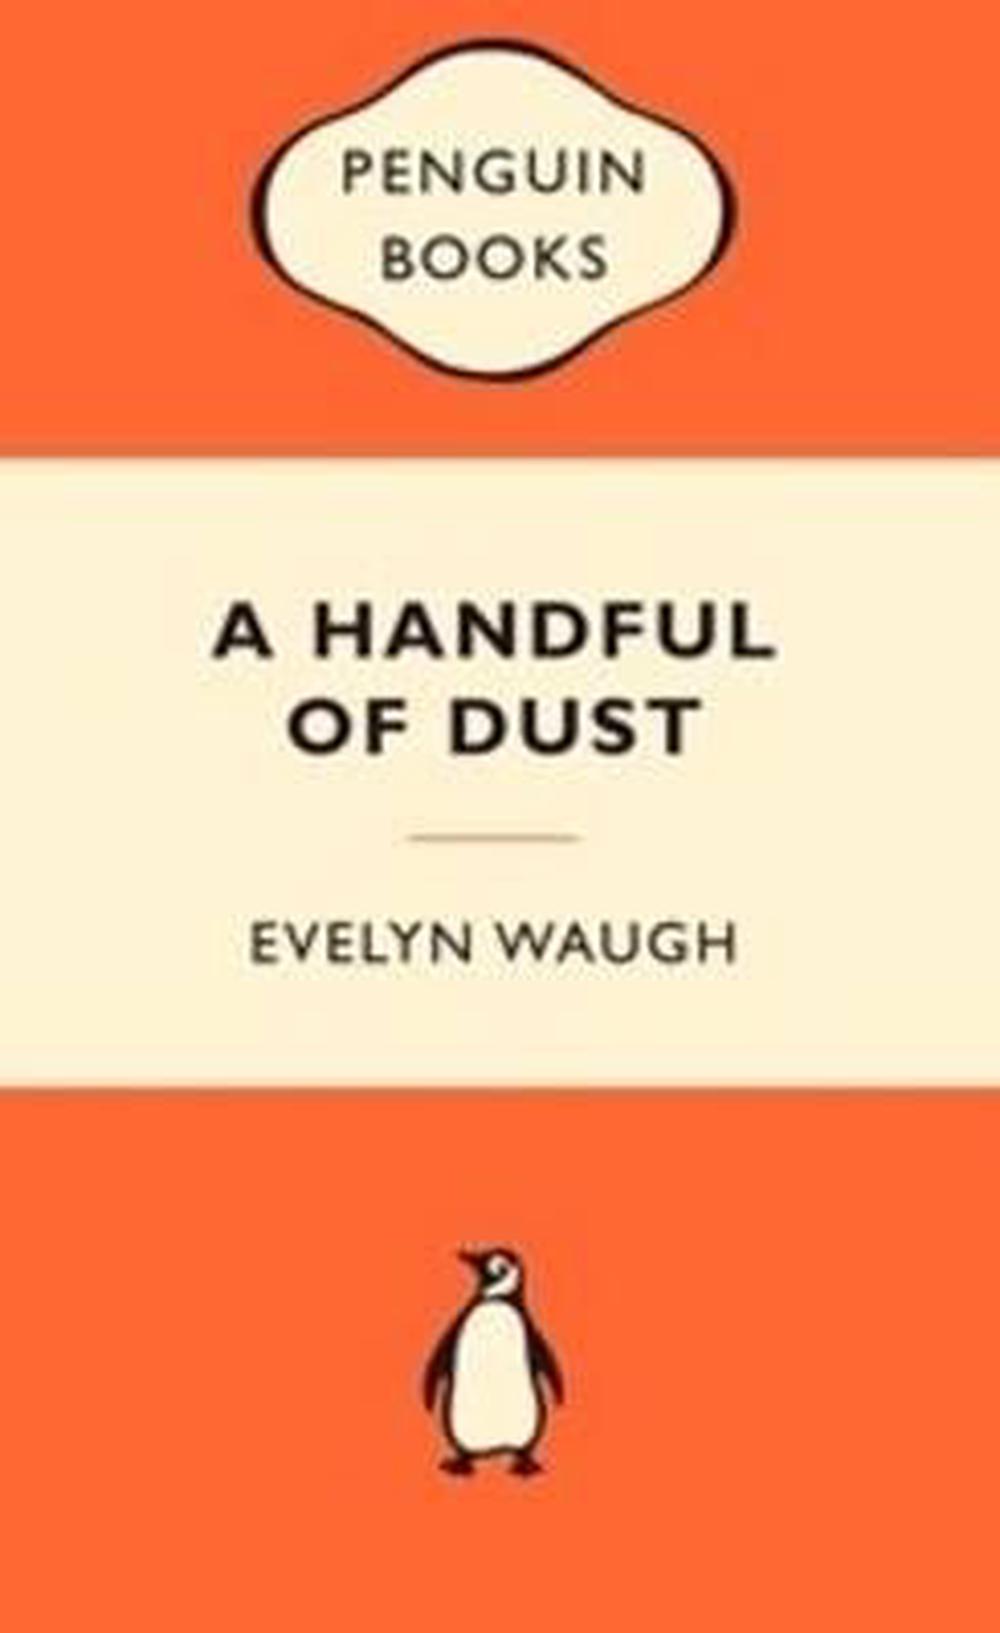 a handful of dust by evelyn waugh